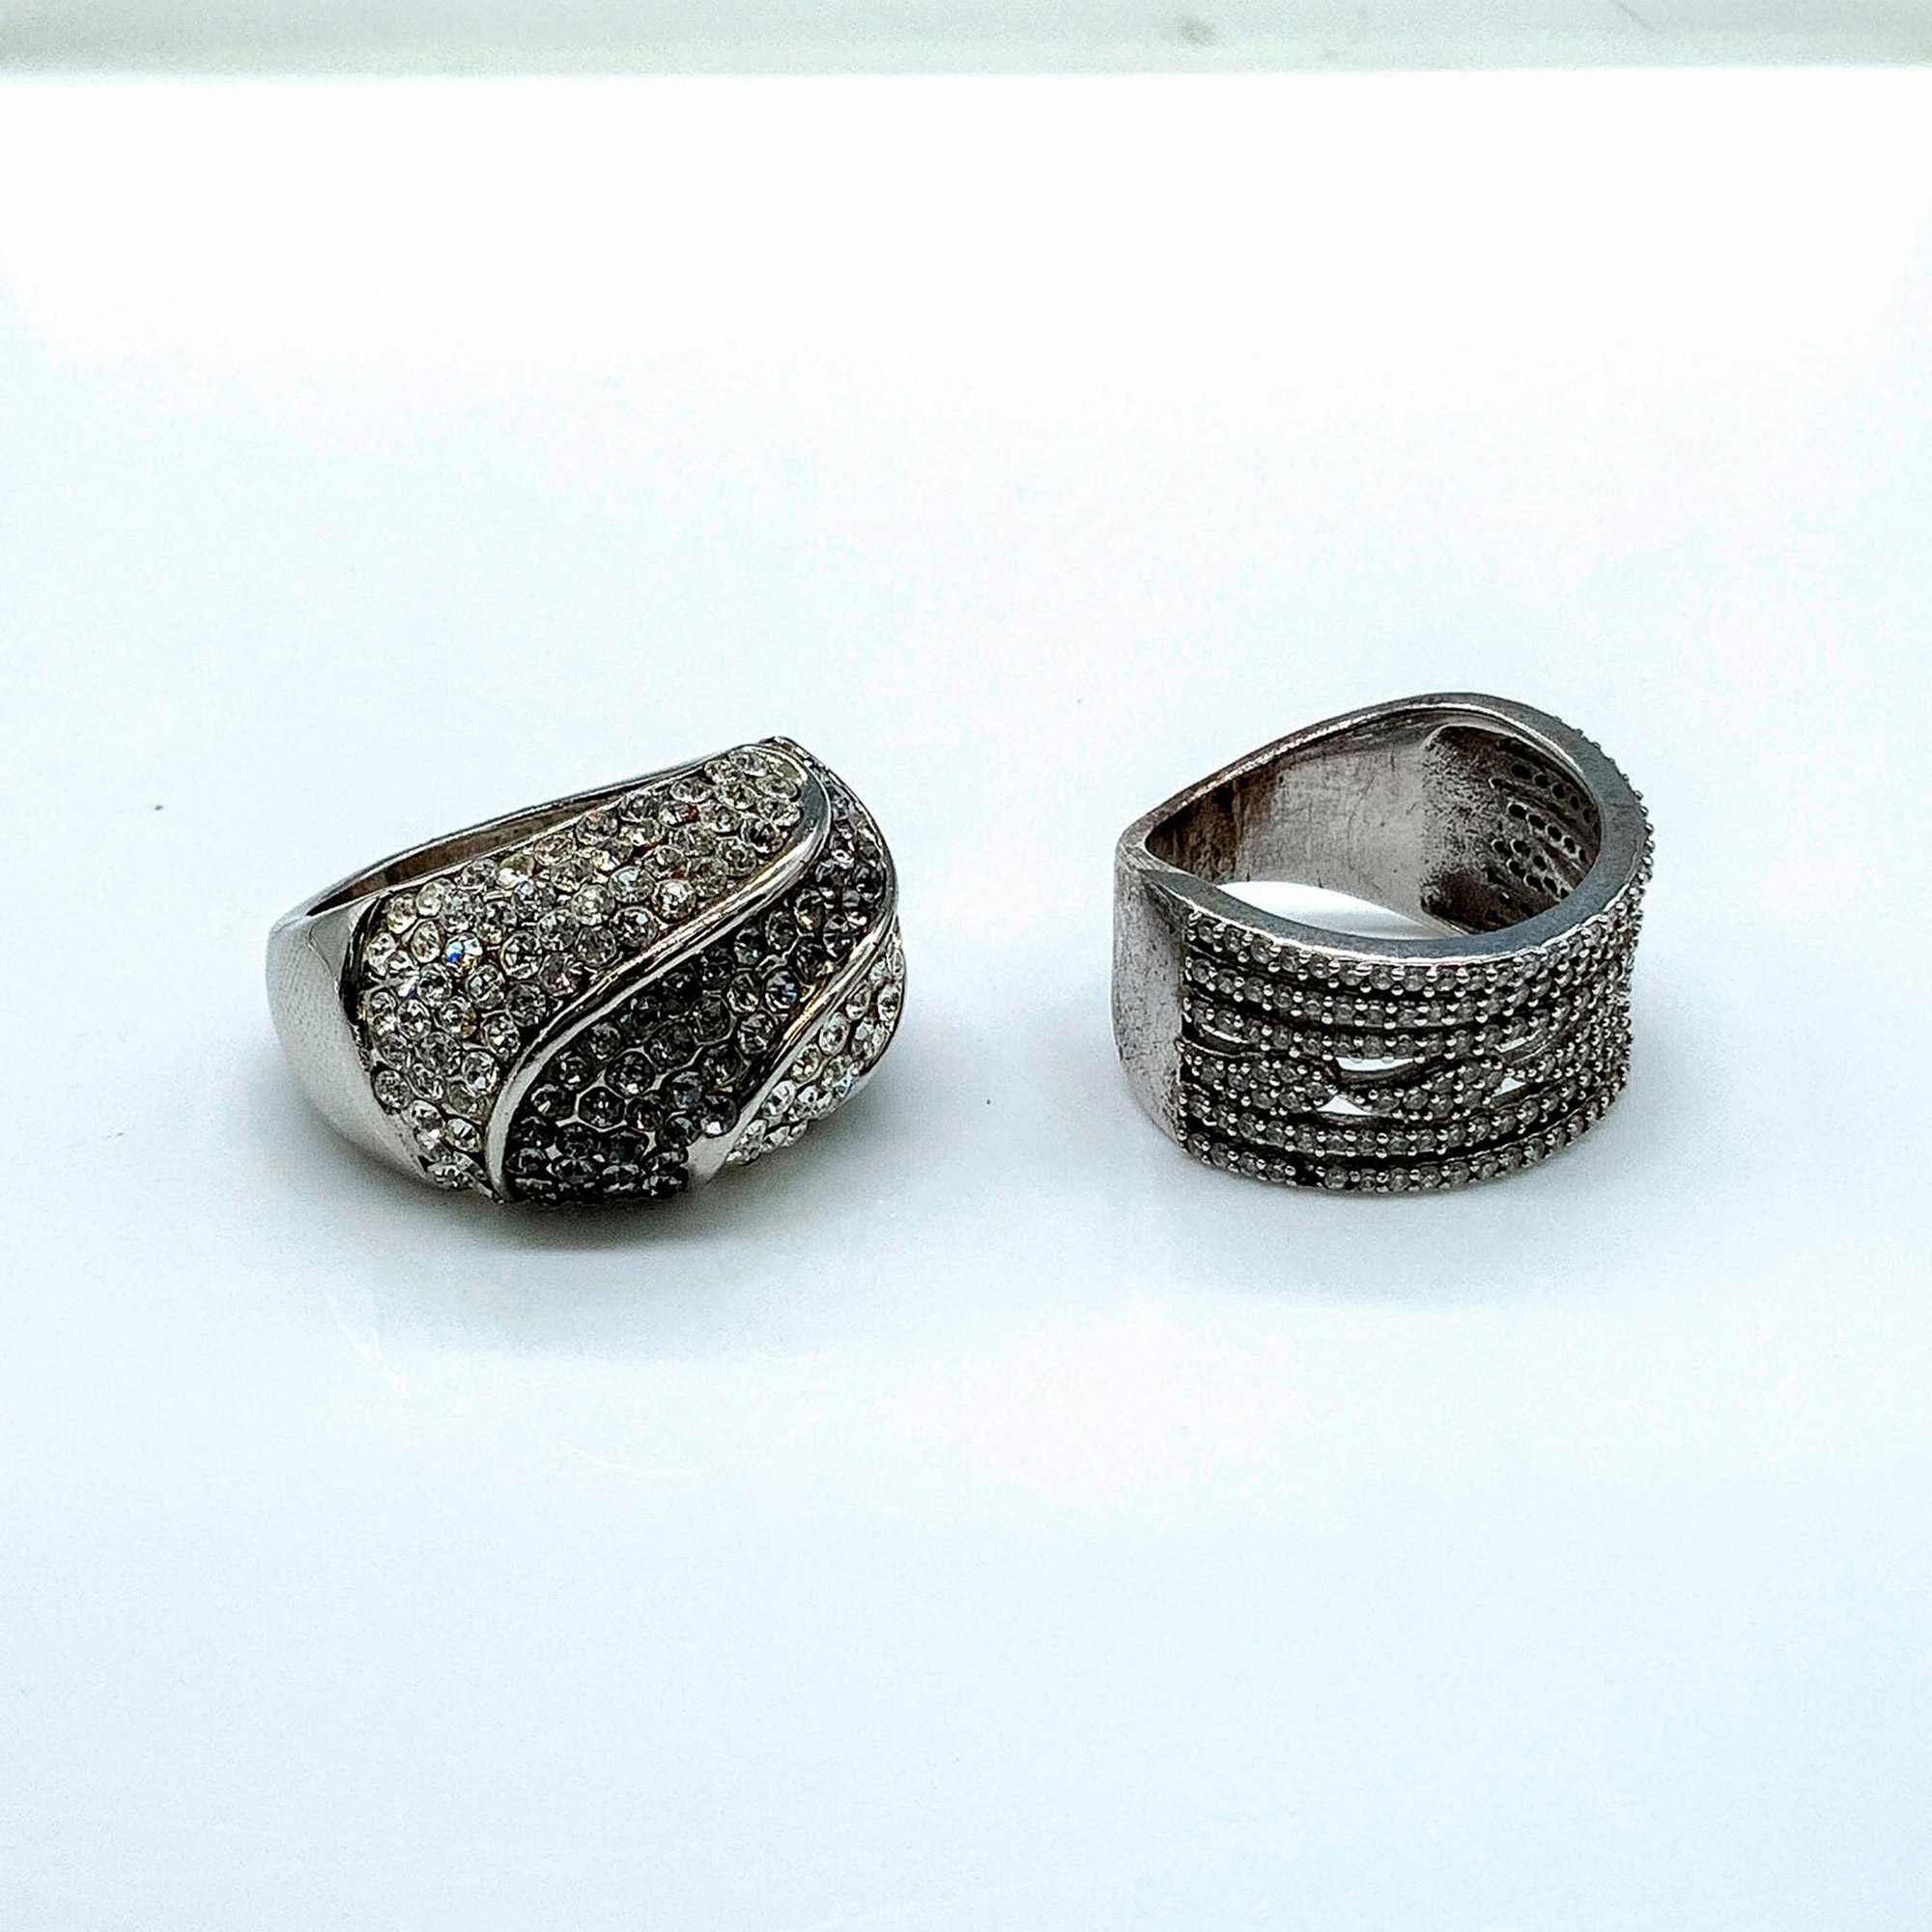 Set of Two Stunning Silver Tone Cubic Zirconia Rings - Image 2 of 2